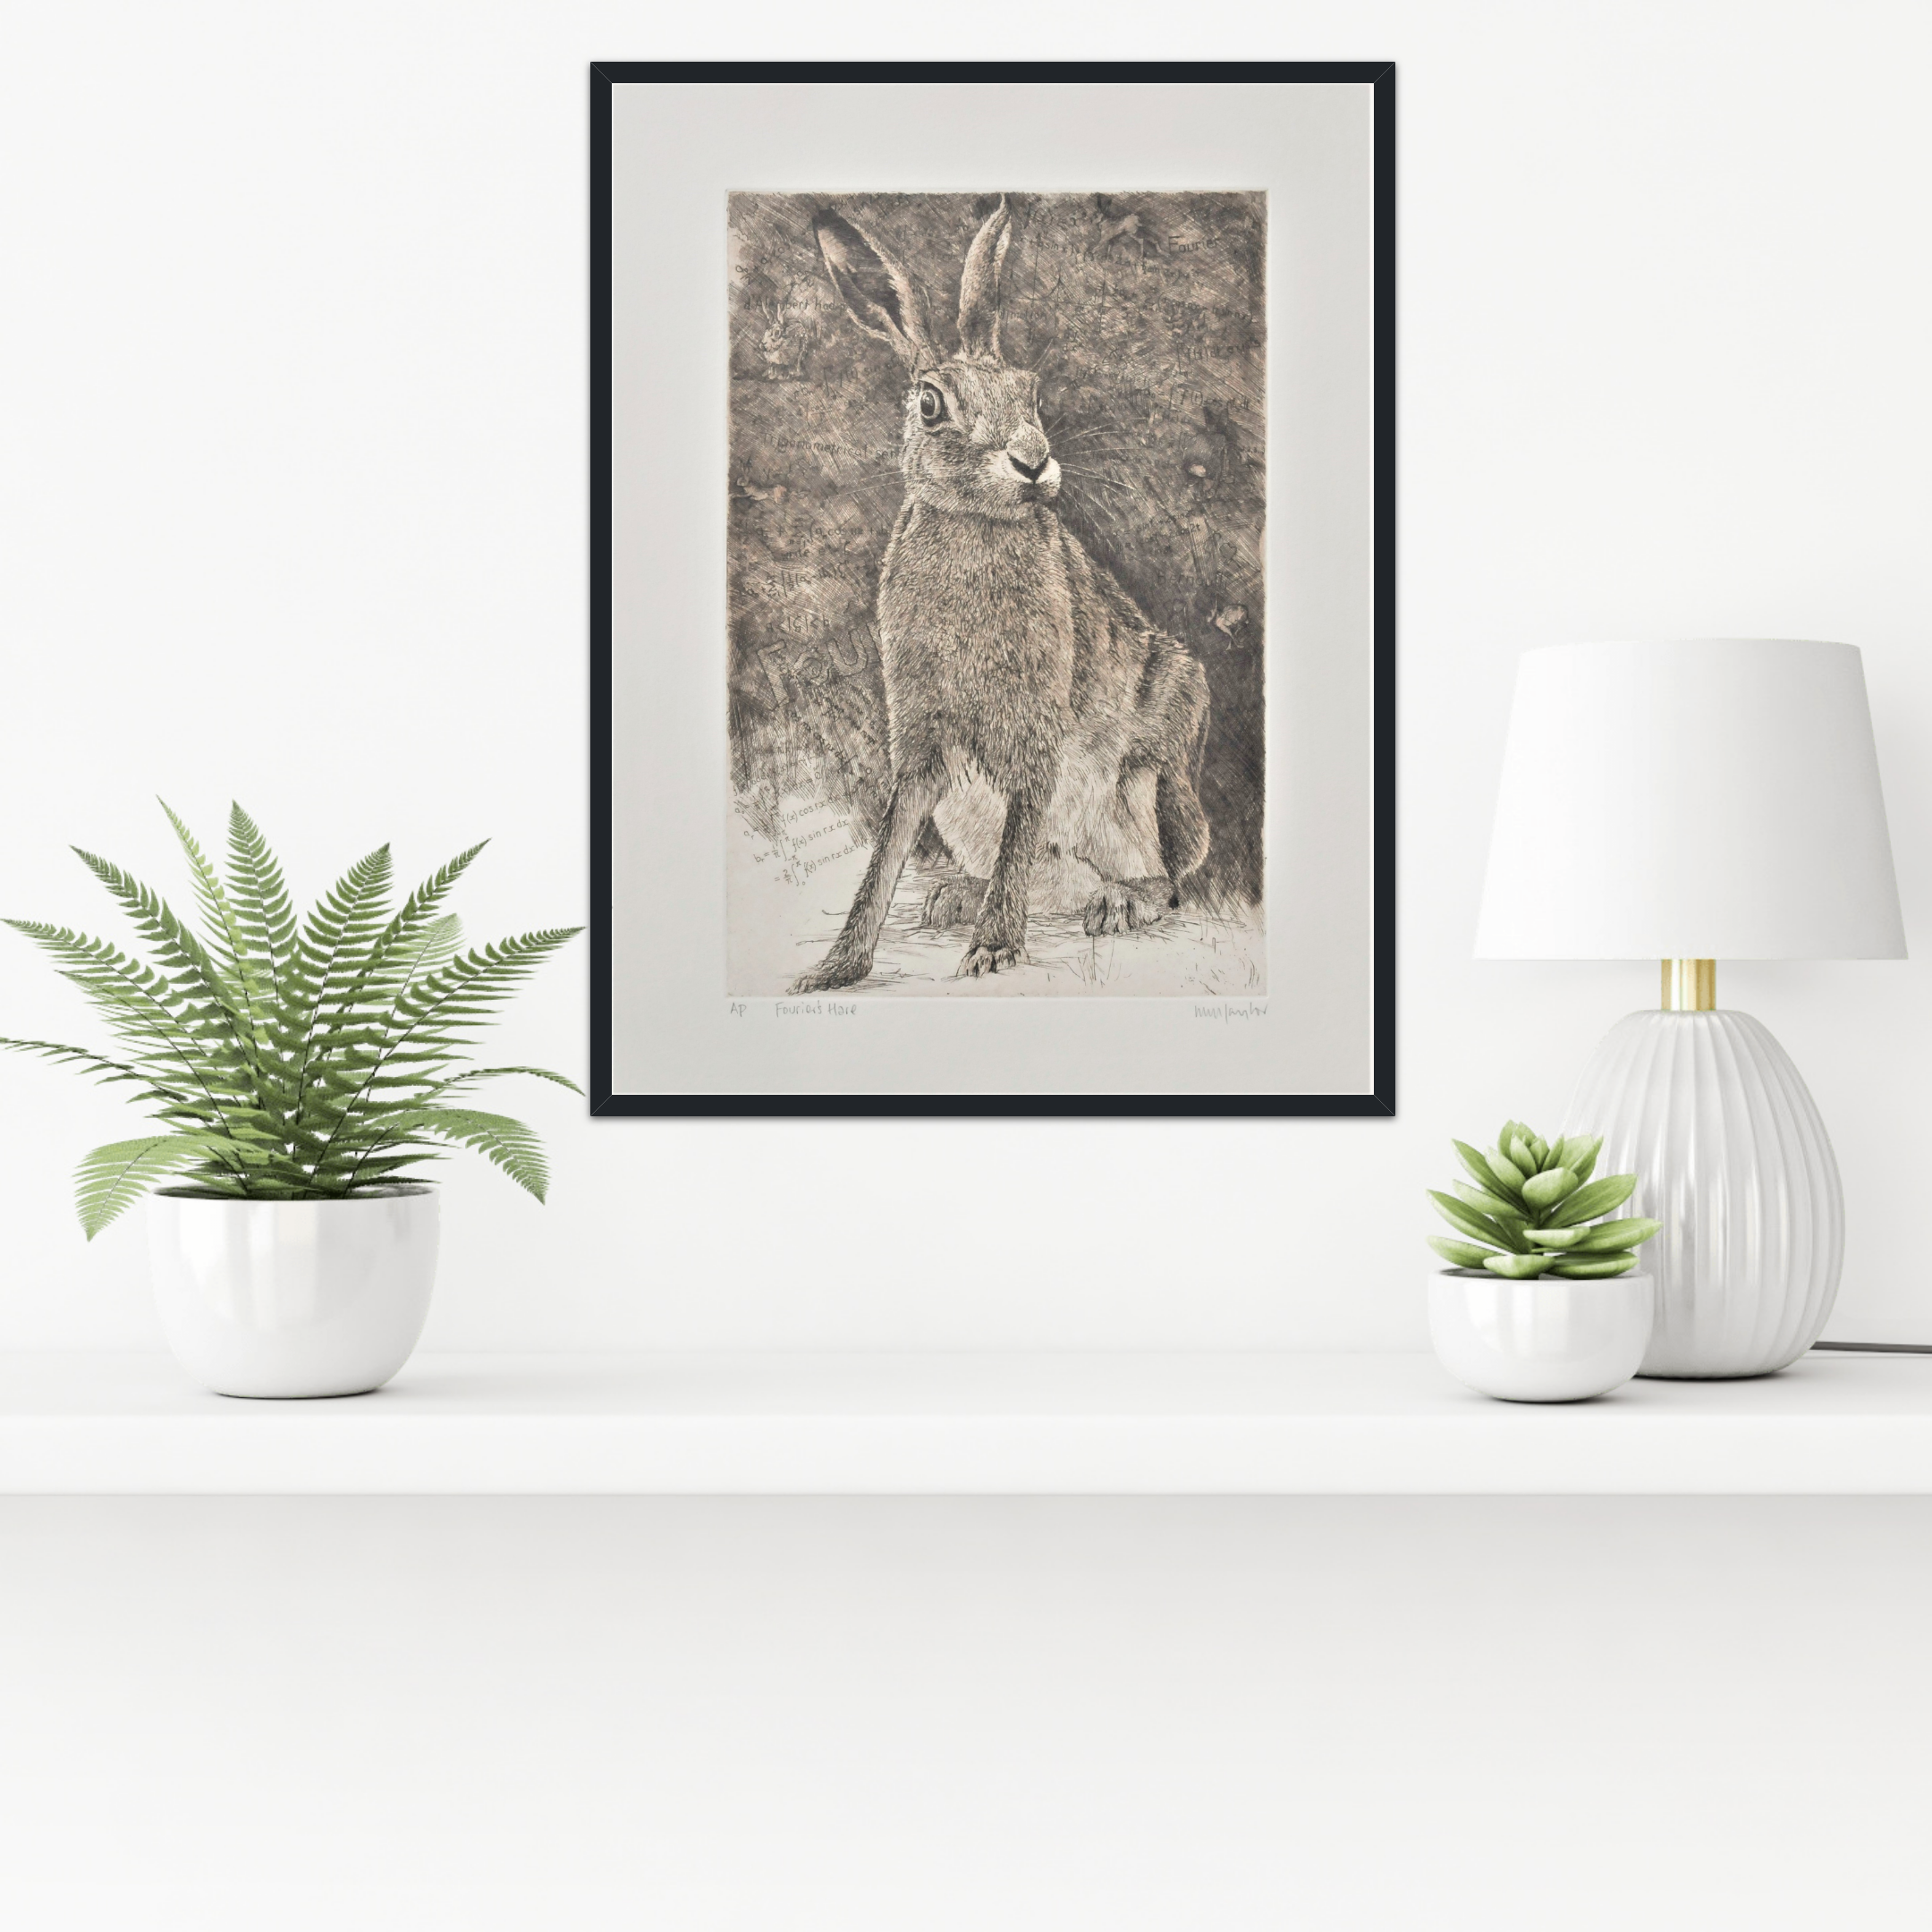 Fourier's Hare by Will Taylor - Secondary Image